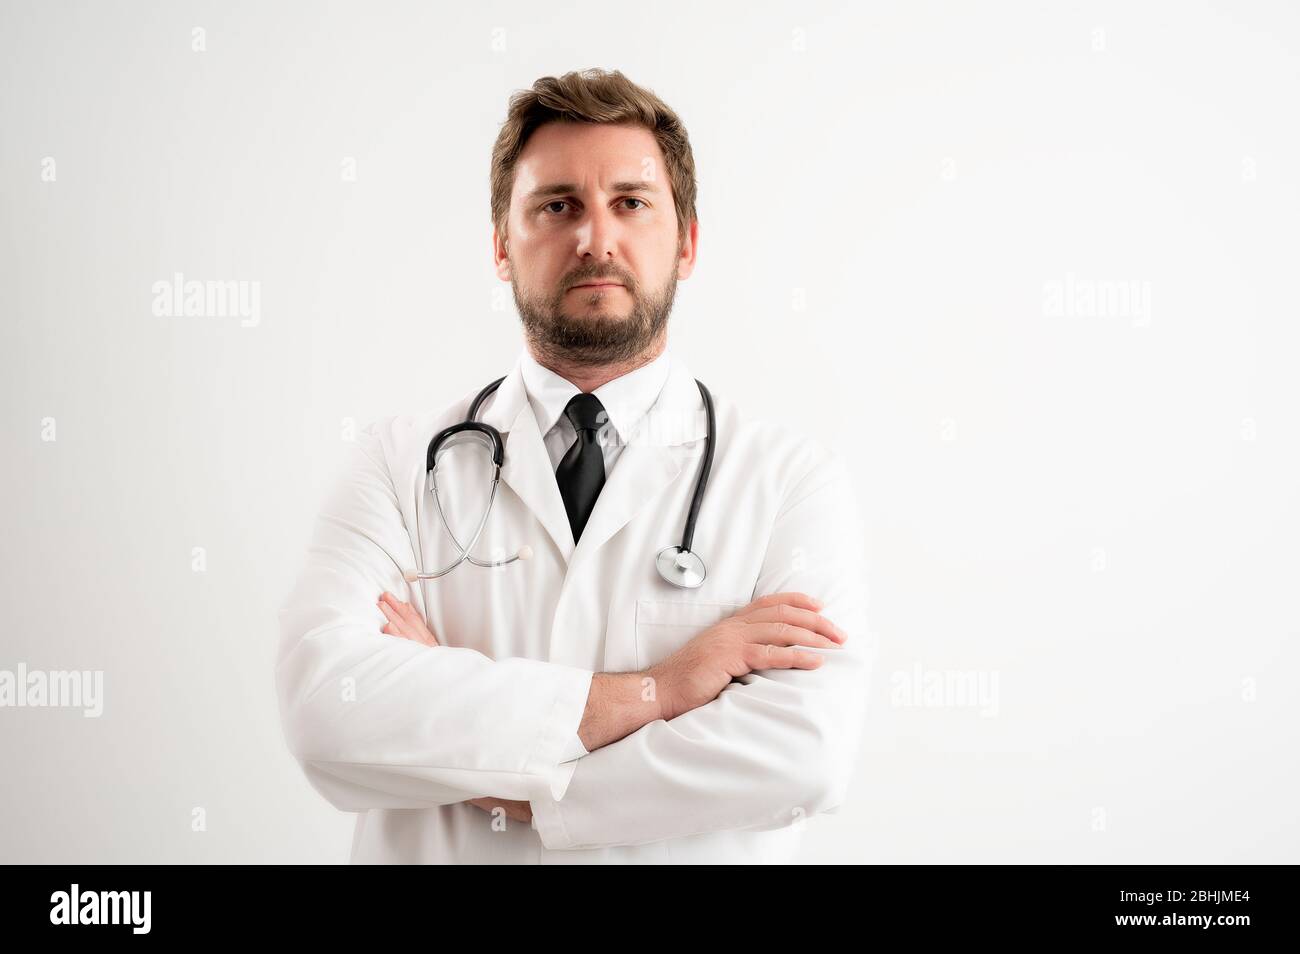 Portrait of male doctor with stethoscope in medical uniform looking confident posing on a white isolated background. Stock Photo